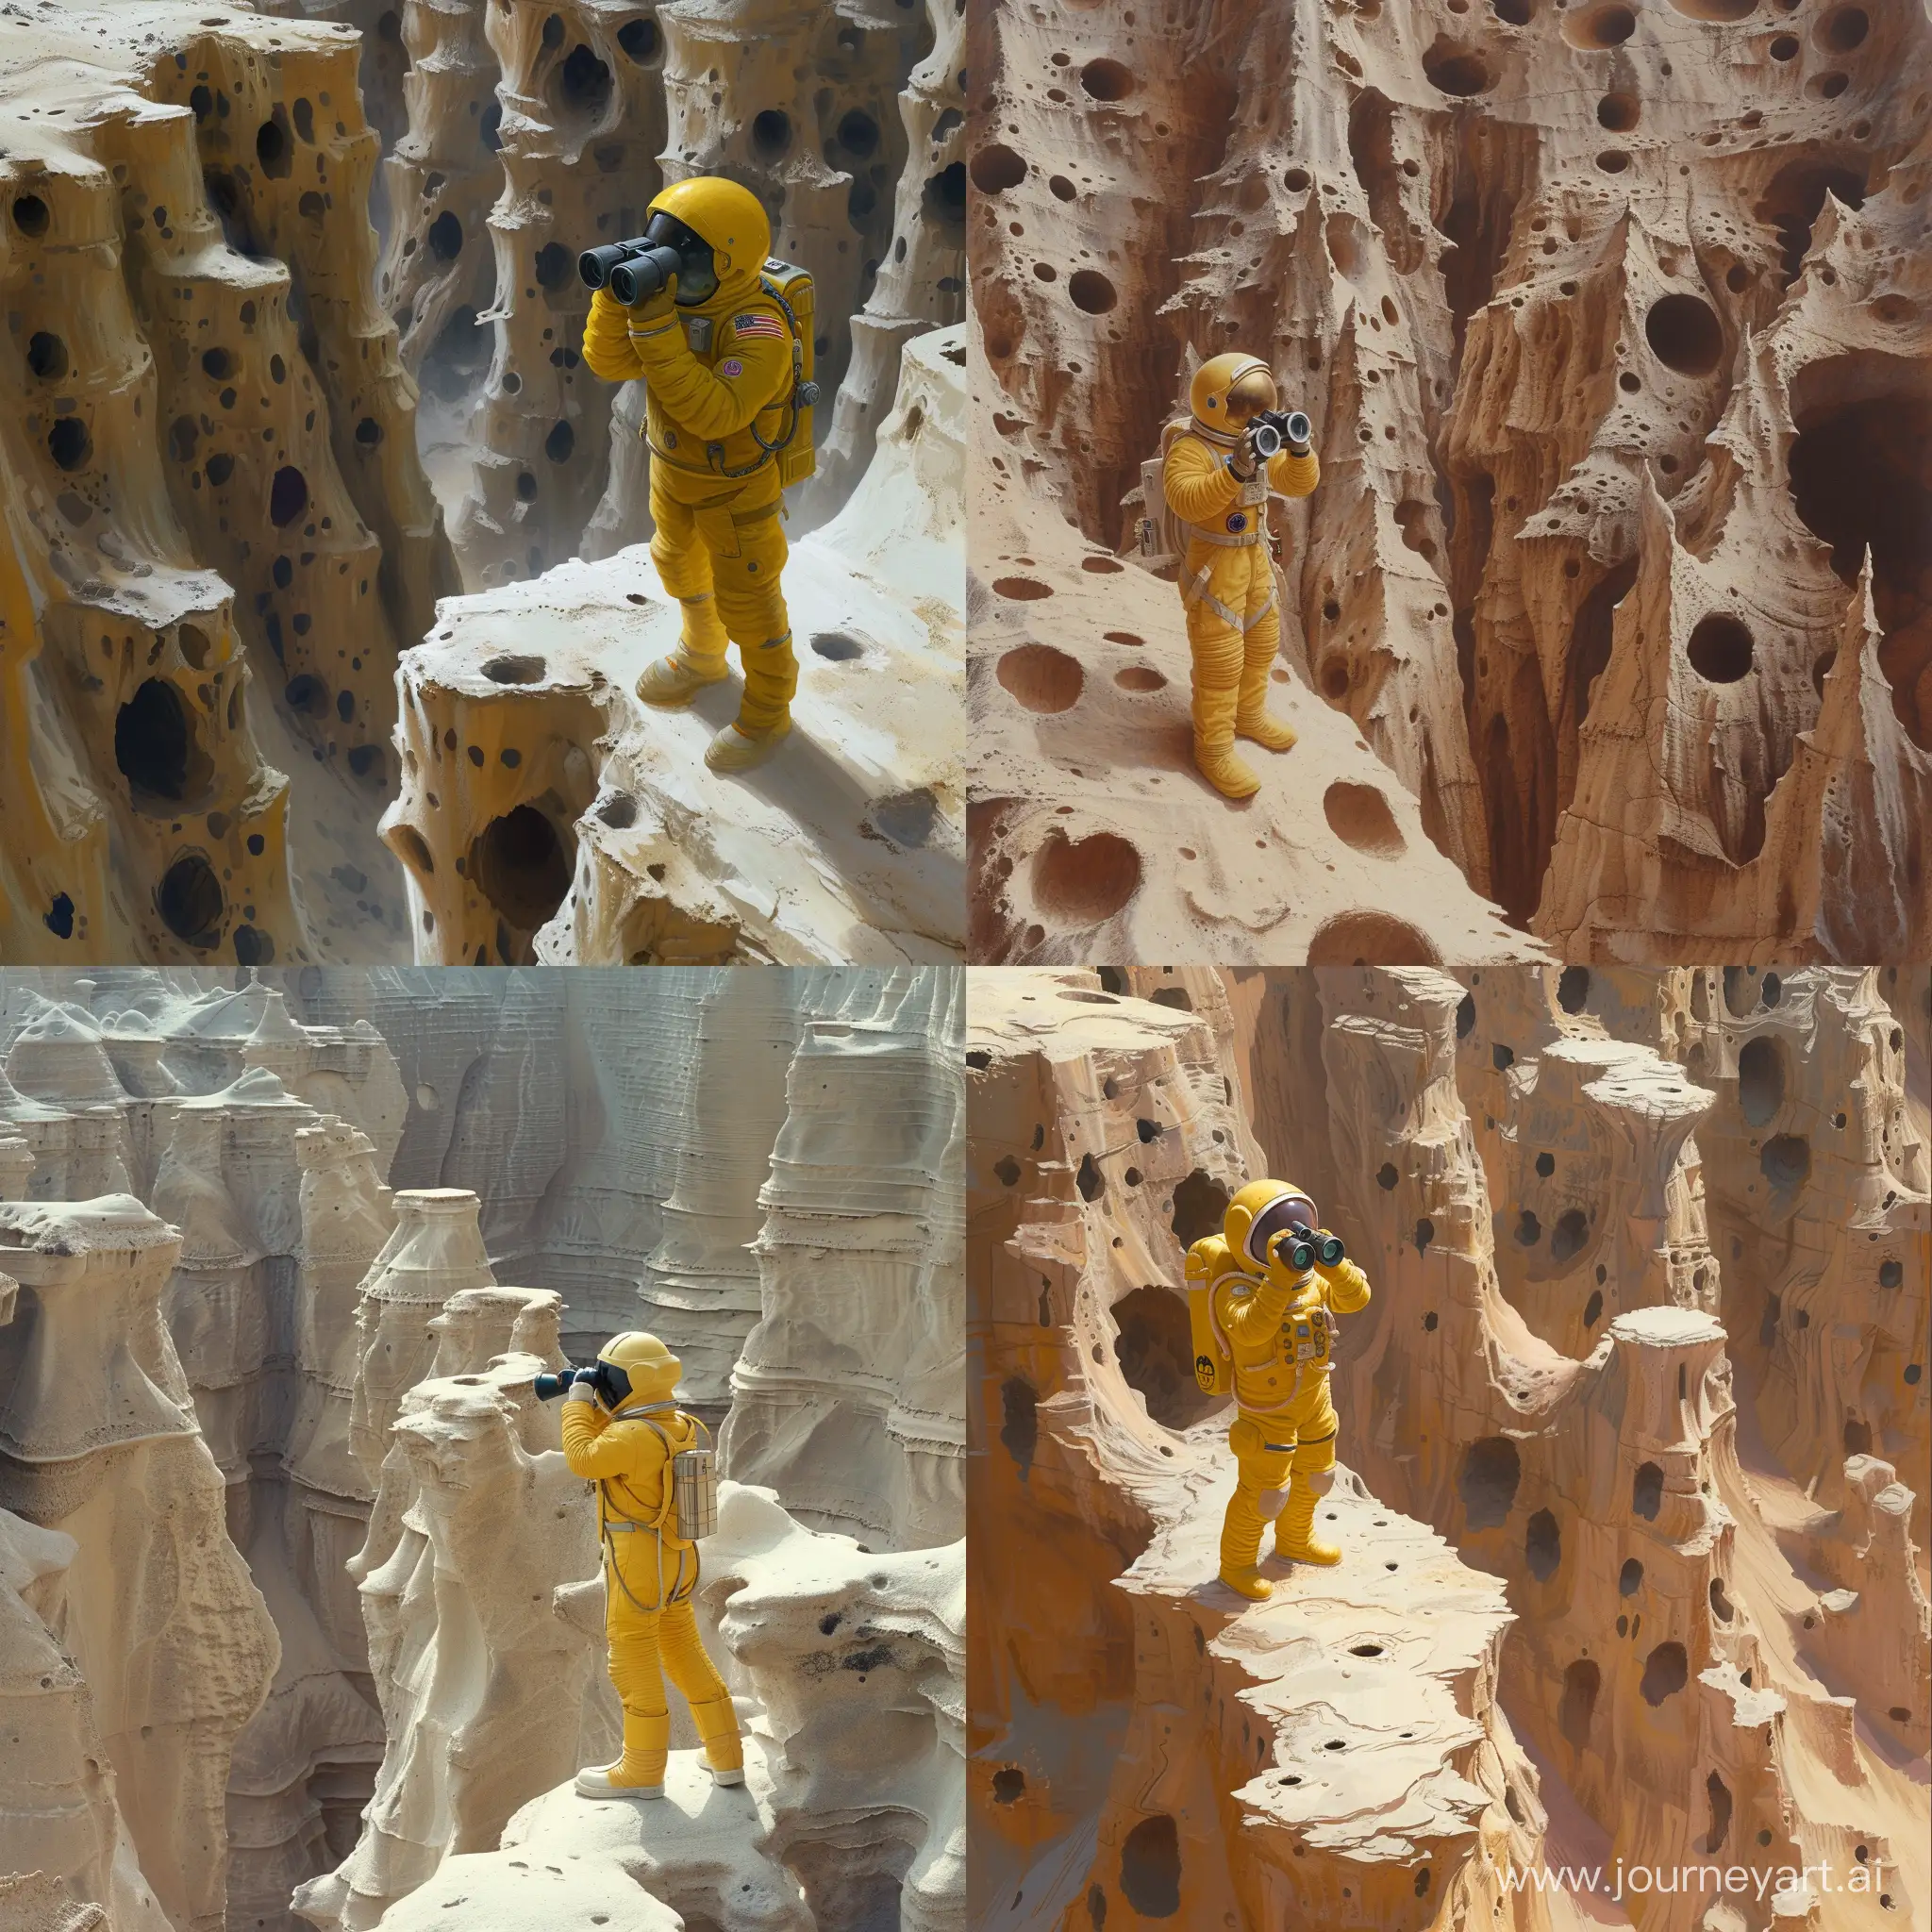 An astronaut in a yellow spacesuit stands on a sandy cliff, looking through binoculars. There are many alien cliffs around it